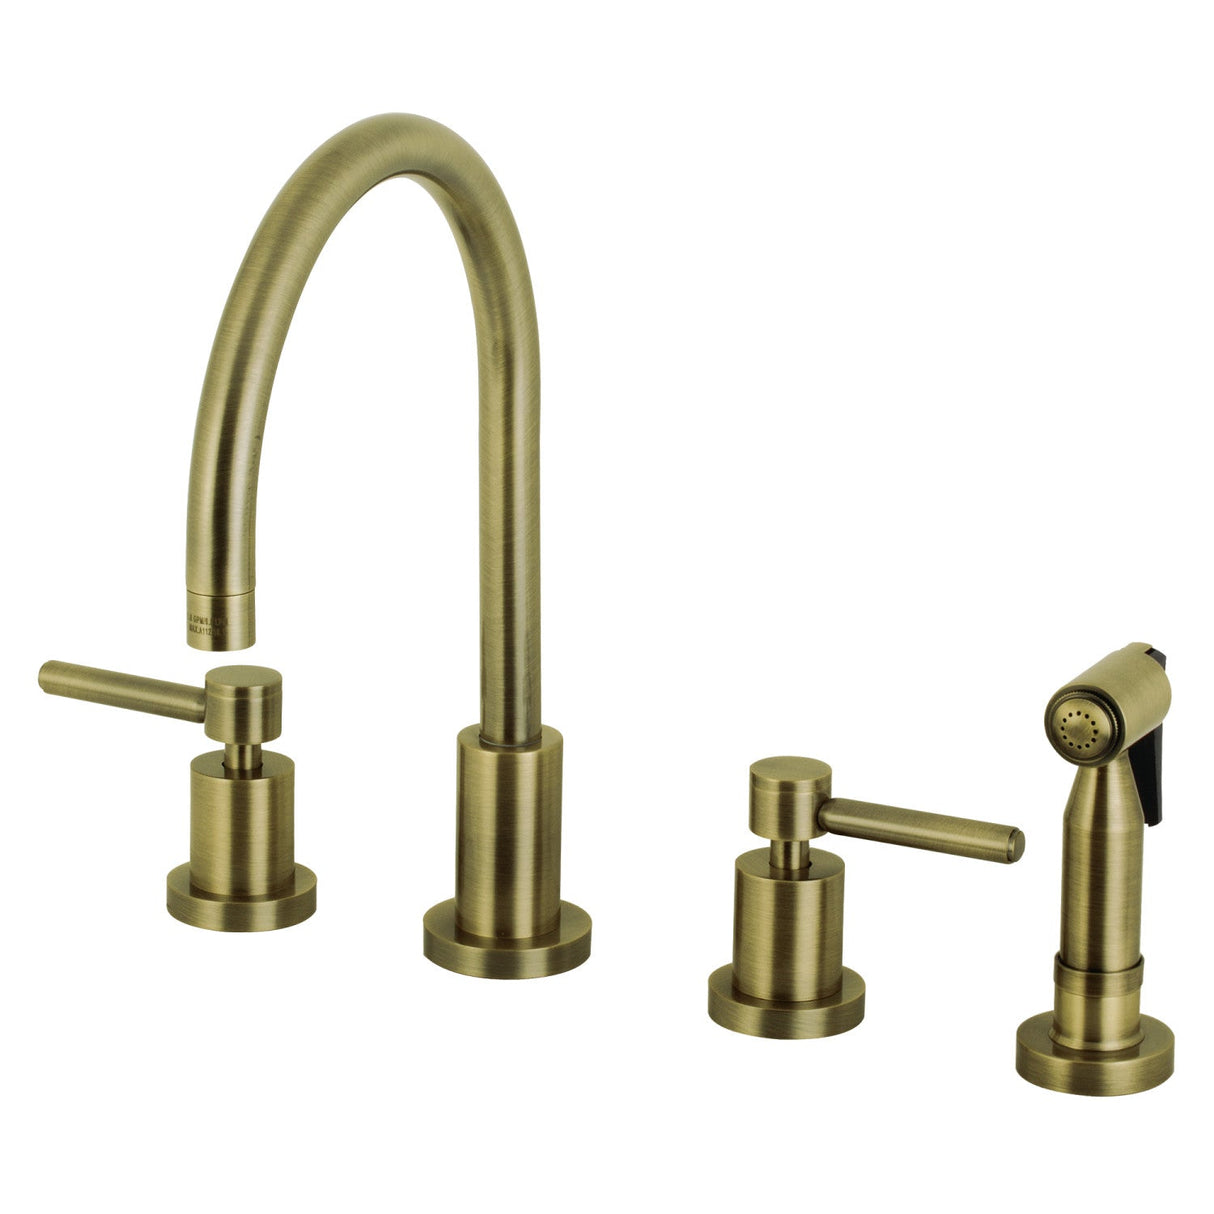 Concord KS8723DLBS Two-Handle 4-Hole Deck Mount Widespread Kitchen Faucet with Brass Sprayer, Antique Brass